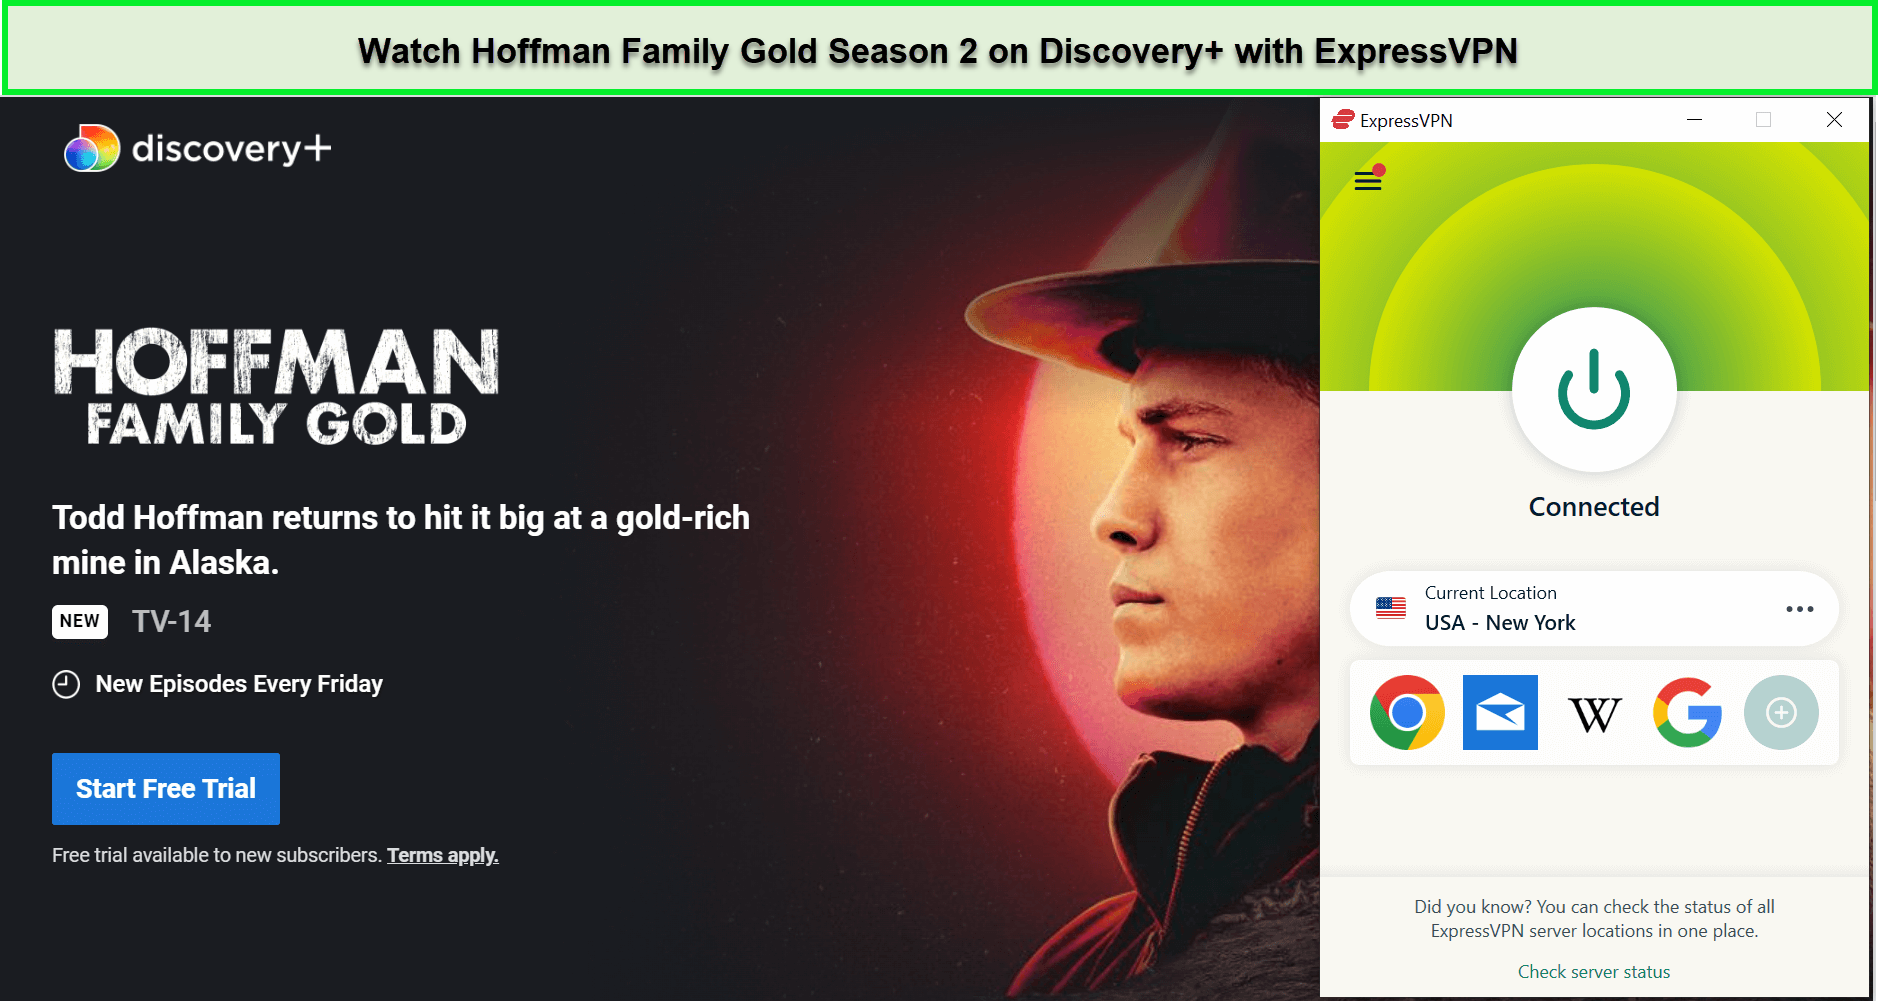 Watch-Hoffman-Family-Gold-Season-2-in-uk-on-Discovery-with-ExpressVPN.